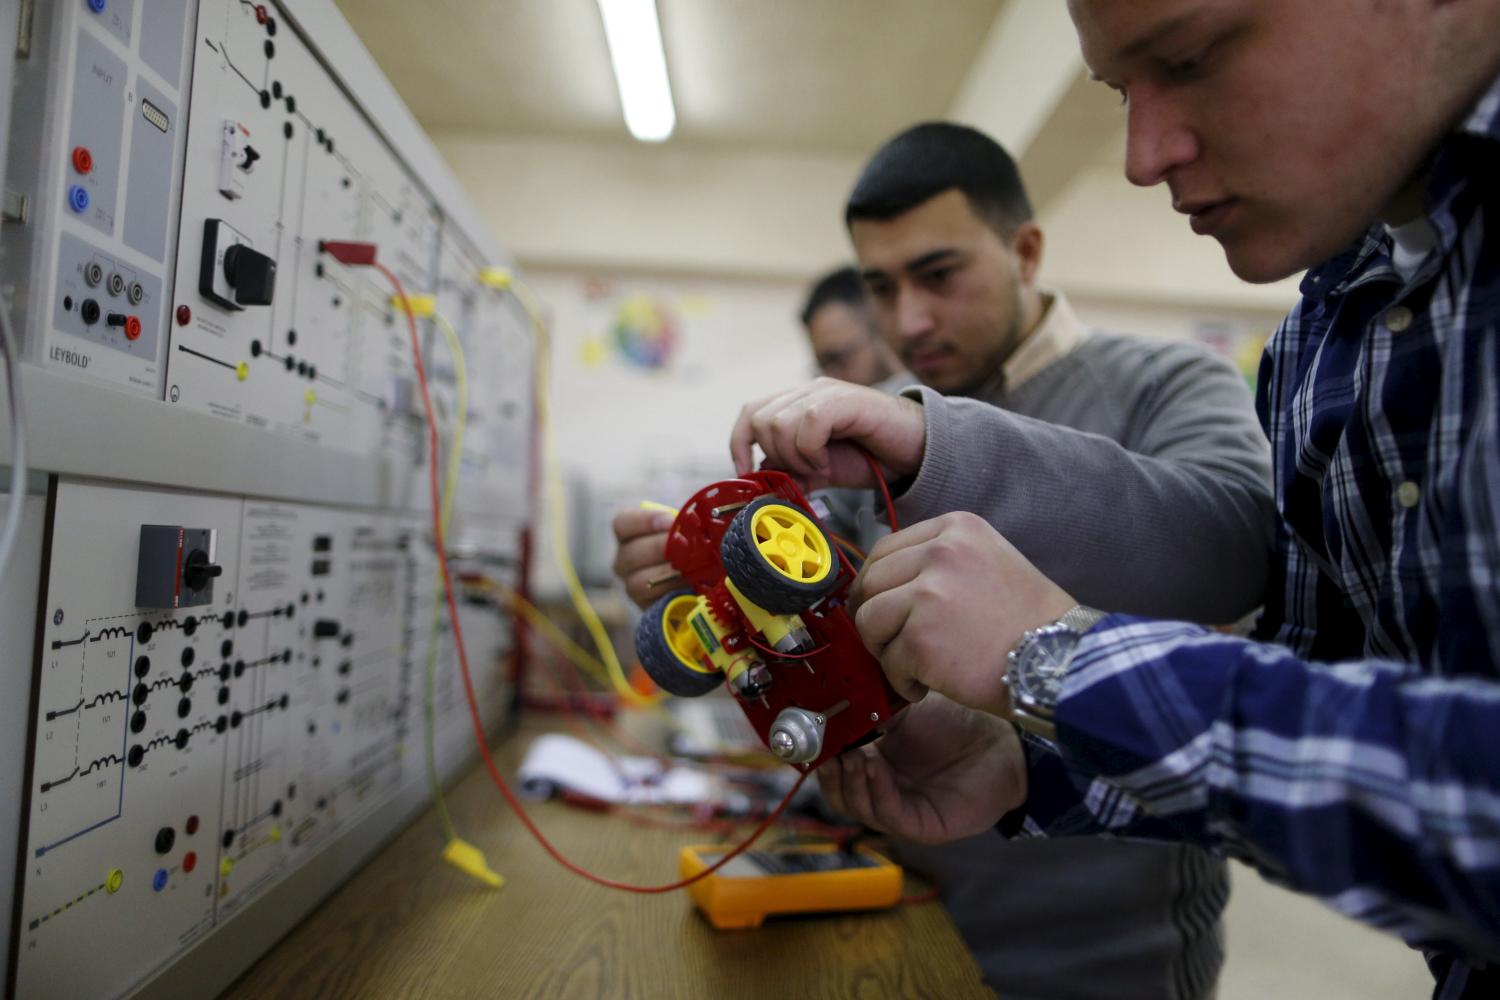 Palestinian students check a small electronic car that they control by an electronic glove they developed, at Birzeit University in the West Bank town of Birzeit January 21, 2016. Three Palestinian student developed the electronic glove that can be used to control several devices, including laptops and robots, as part of their graduation project. REUTERS/Ammar Awad